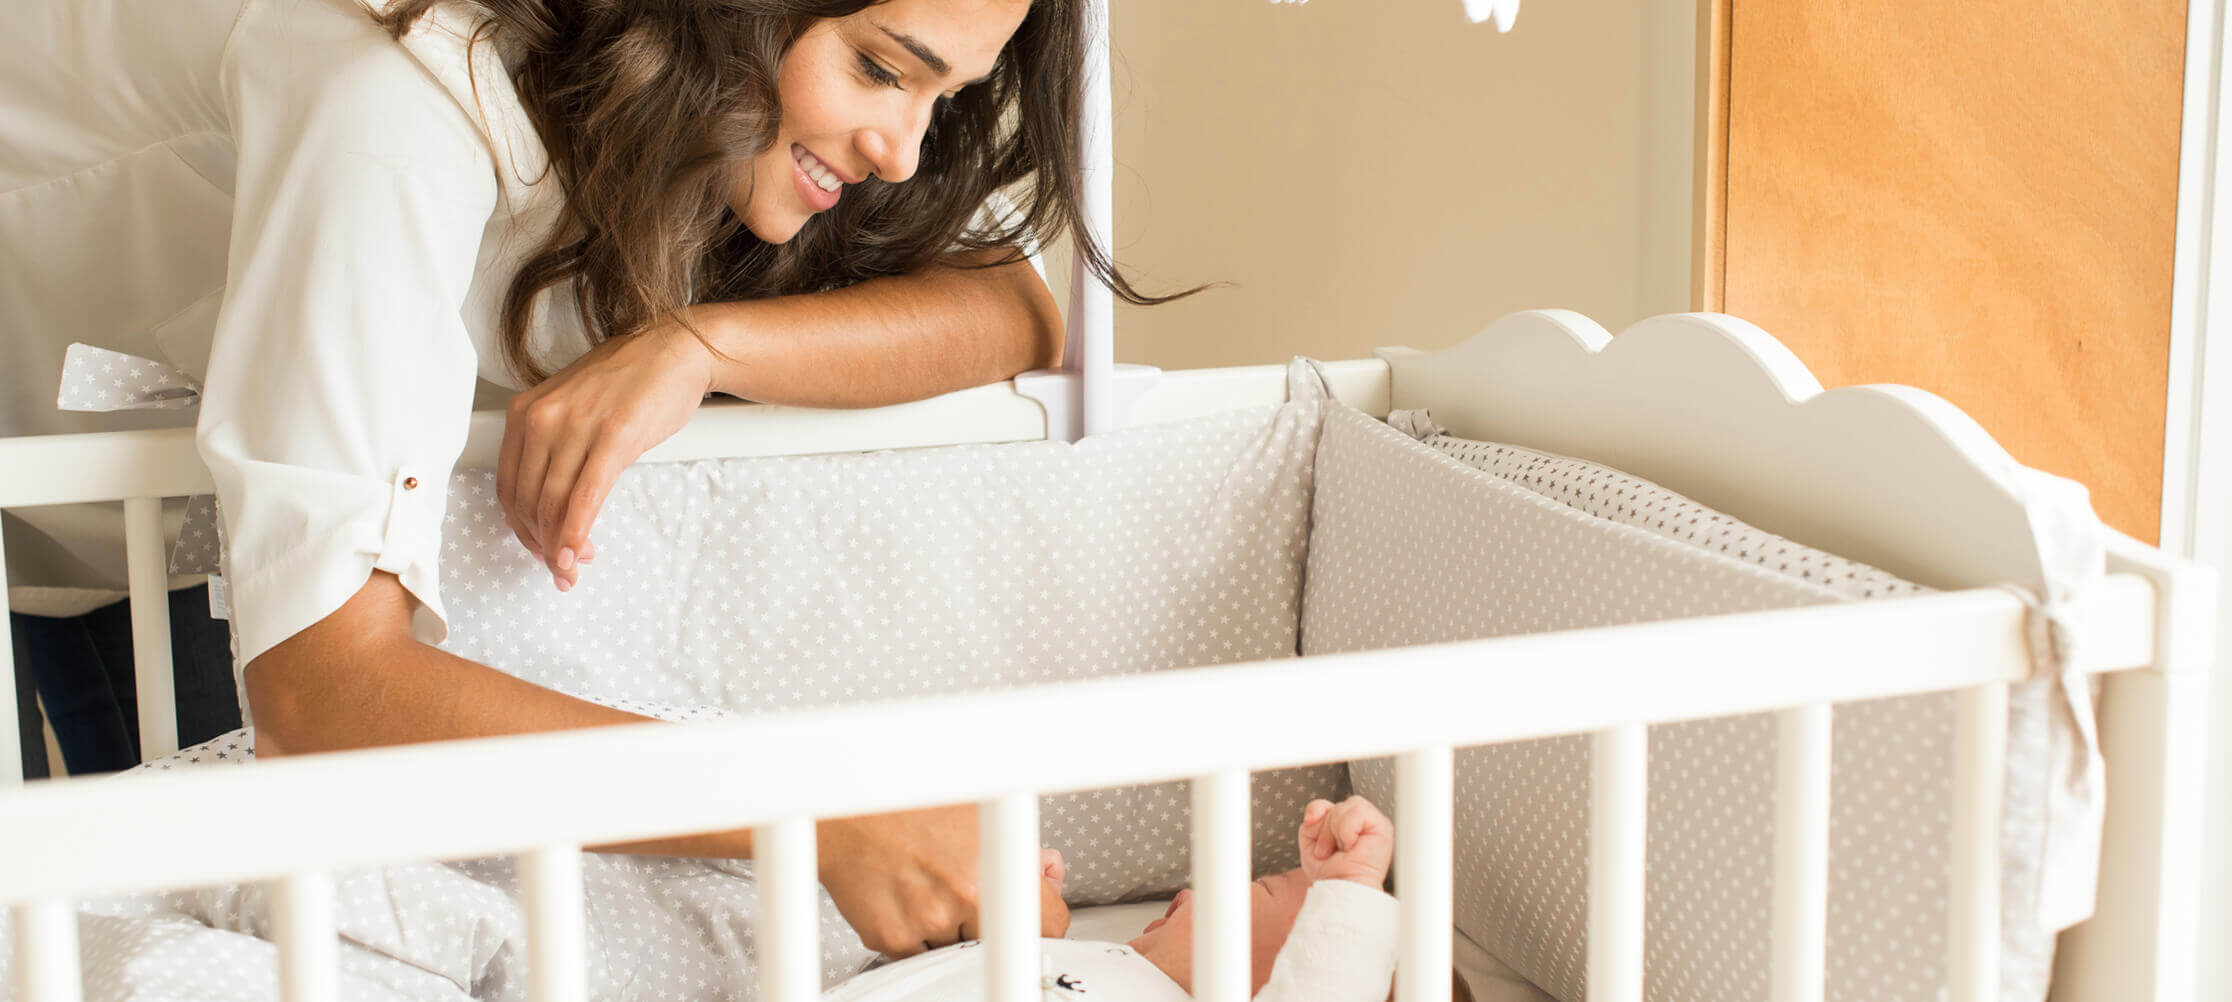 Organic crib mattress the right choice for your loved ones!